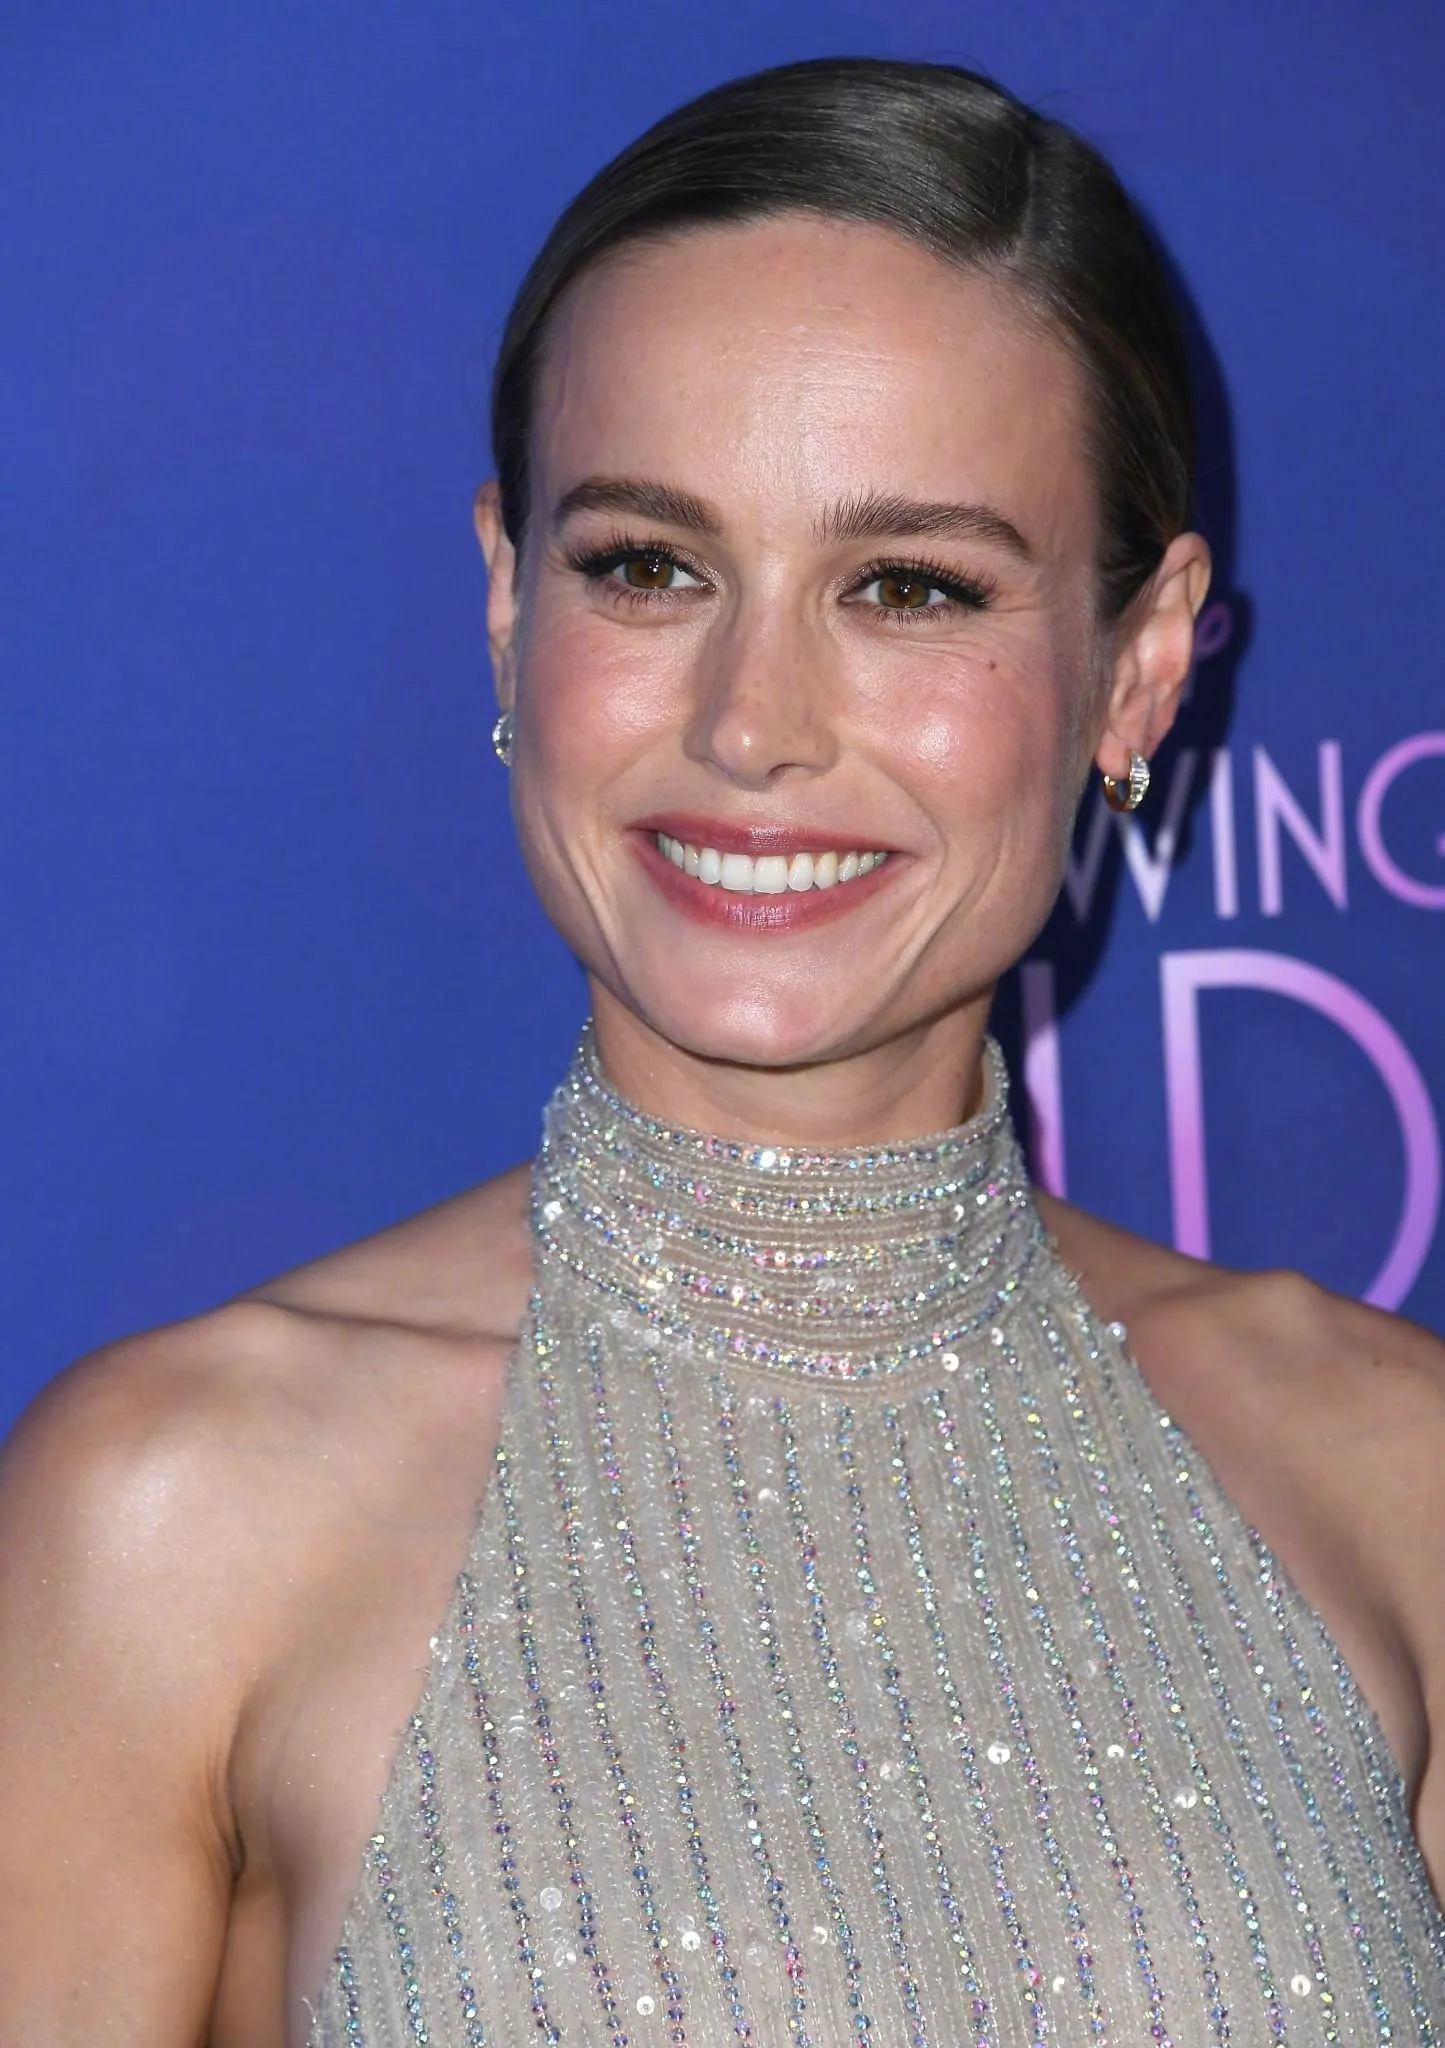 Brie Larson Attends Premiere of Documentary Drama 'Growing Up' | FMV6